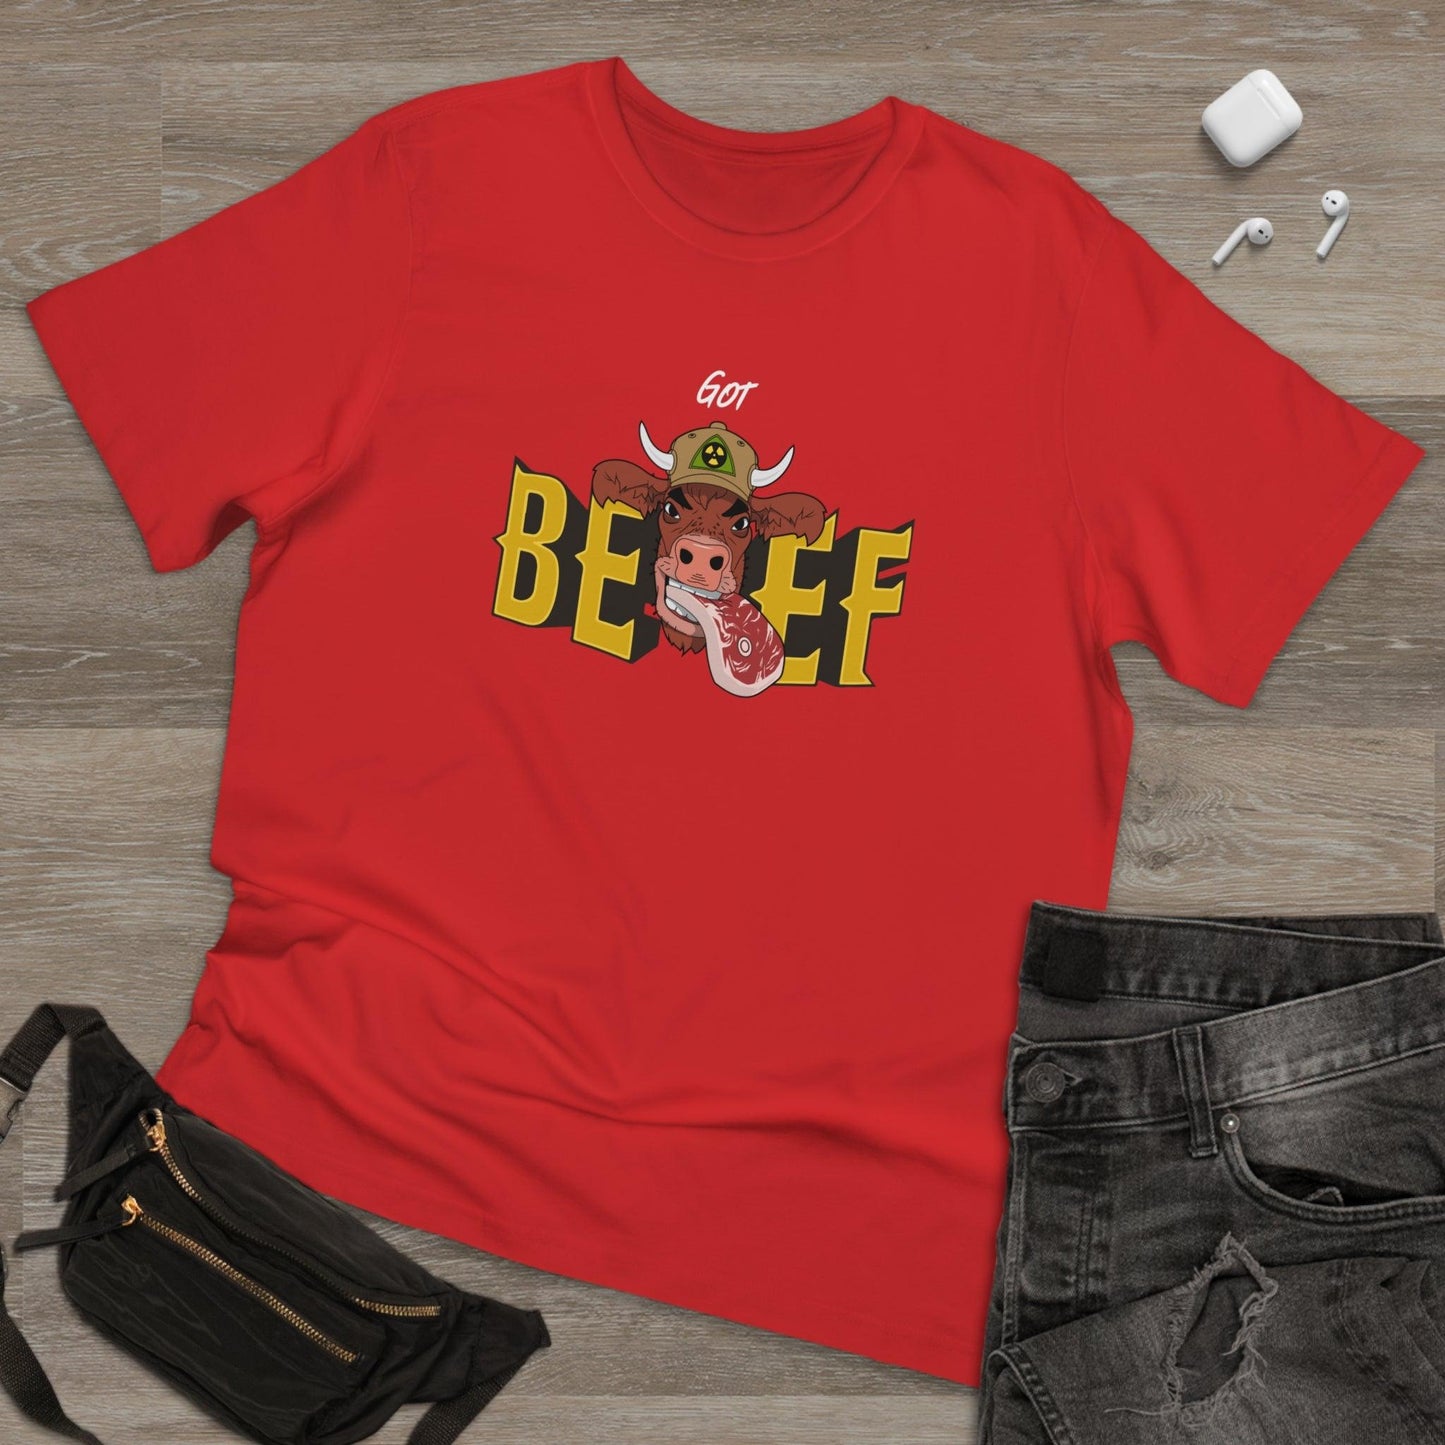 I Crave Beef - Unisex Deluxe T-shirt - Shaneinvasion